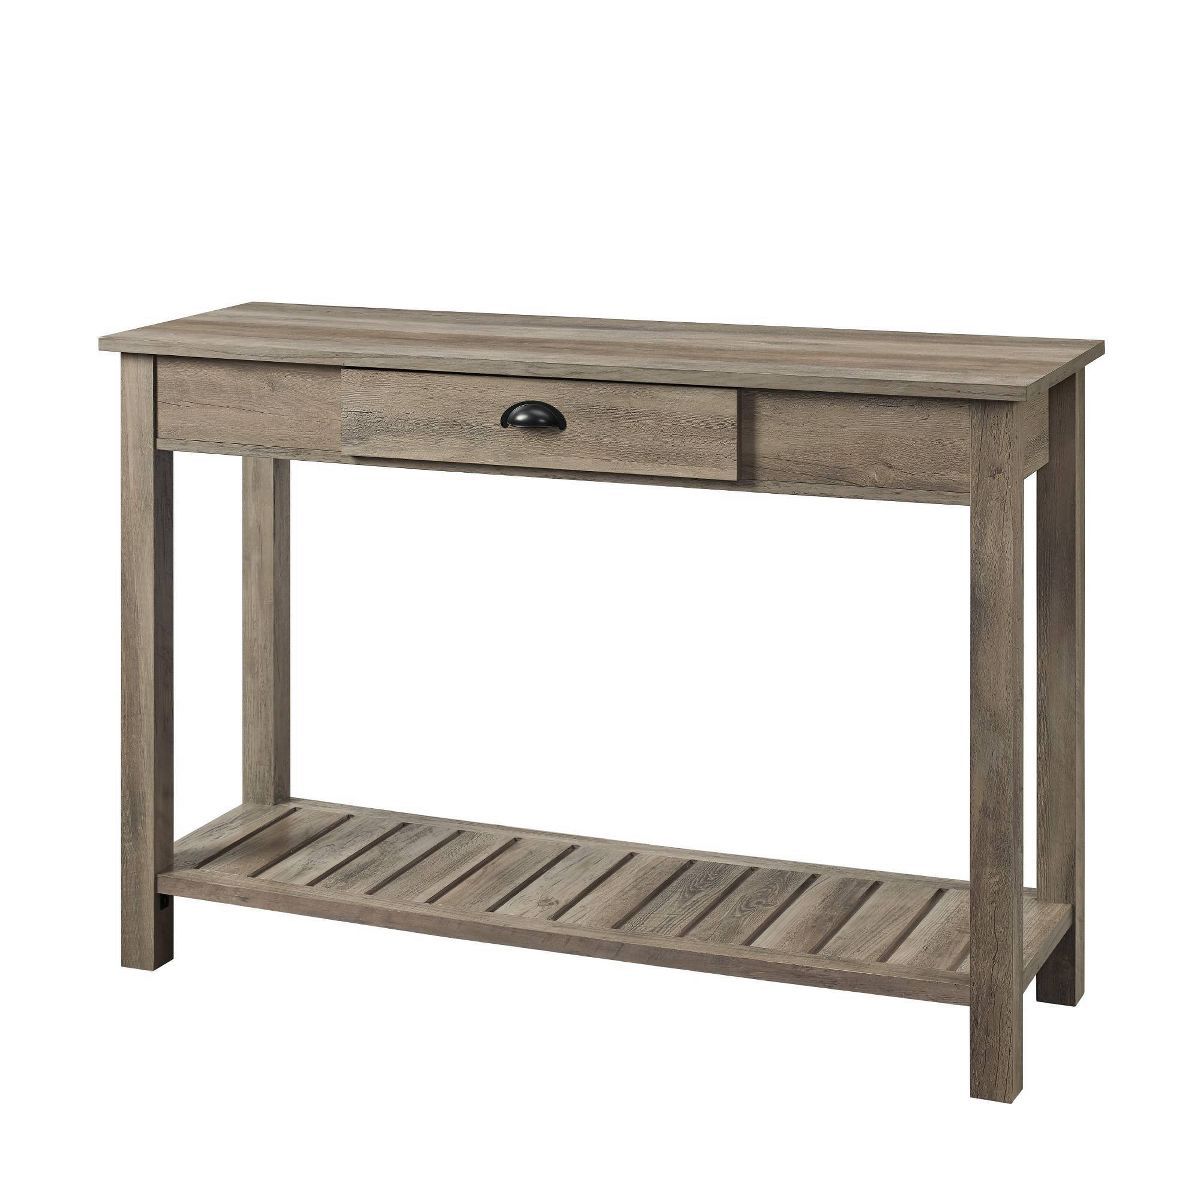 June Rustic Farmhouse Entry Table with Lower Shelf Gray Wash - Saracina Home | Target